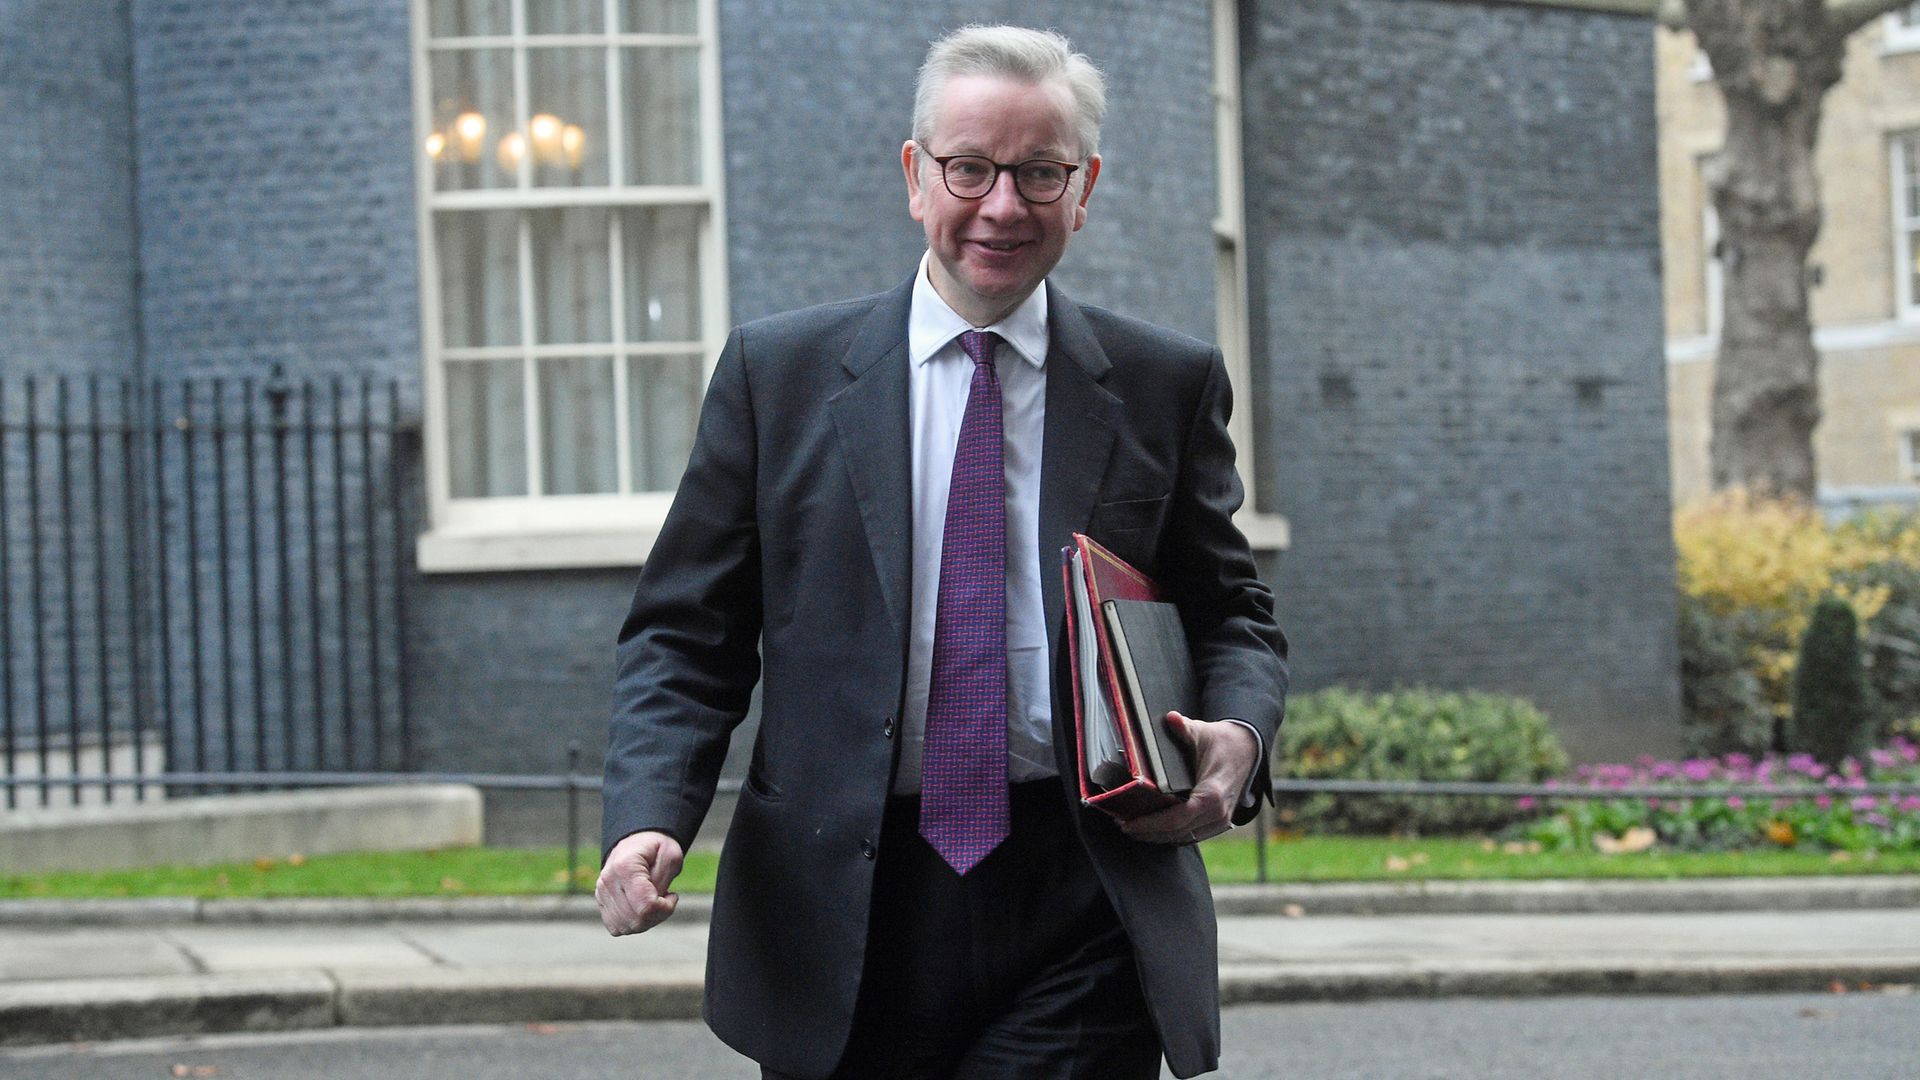 Michael Gove, Minister for the Cabinet Office and Chancellor of the Duchy of Lancaster, arrives in Downing Street - Credit: PA